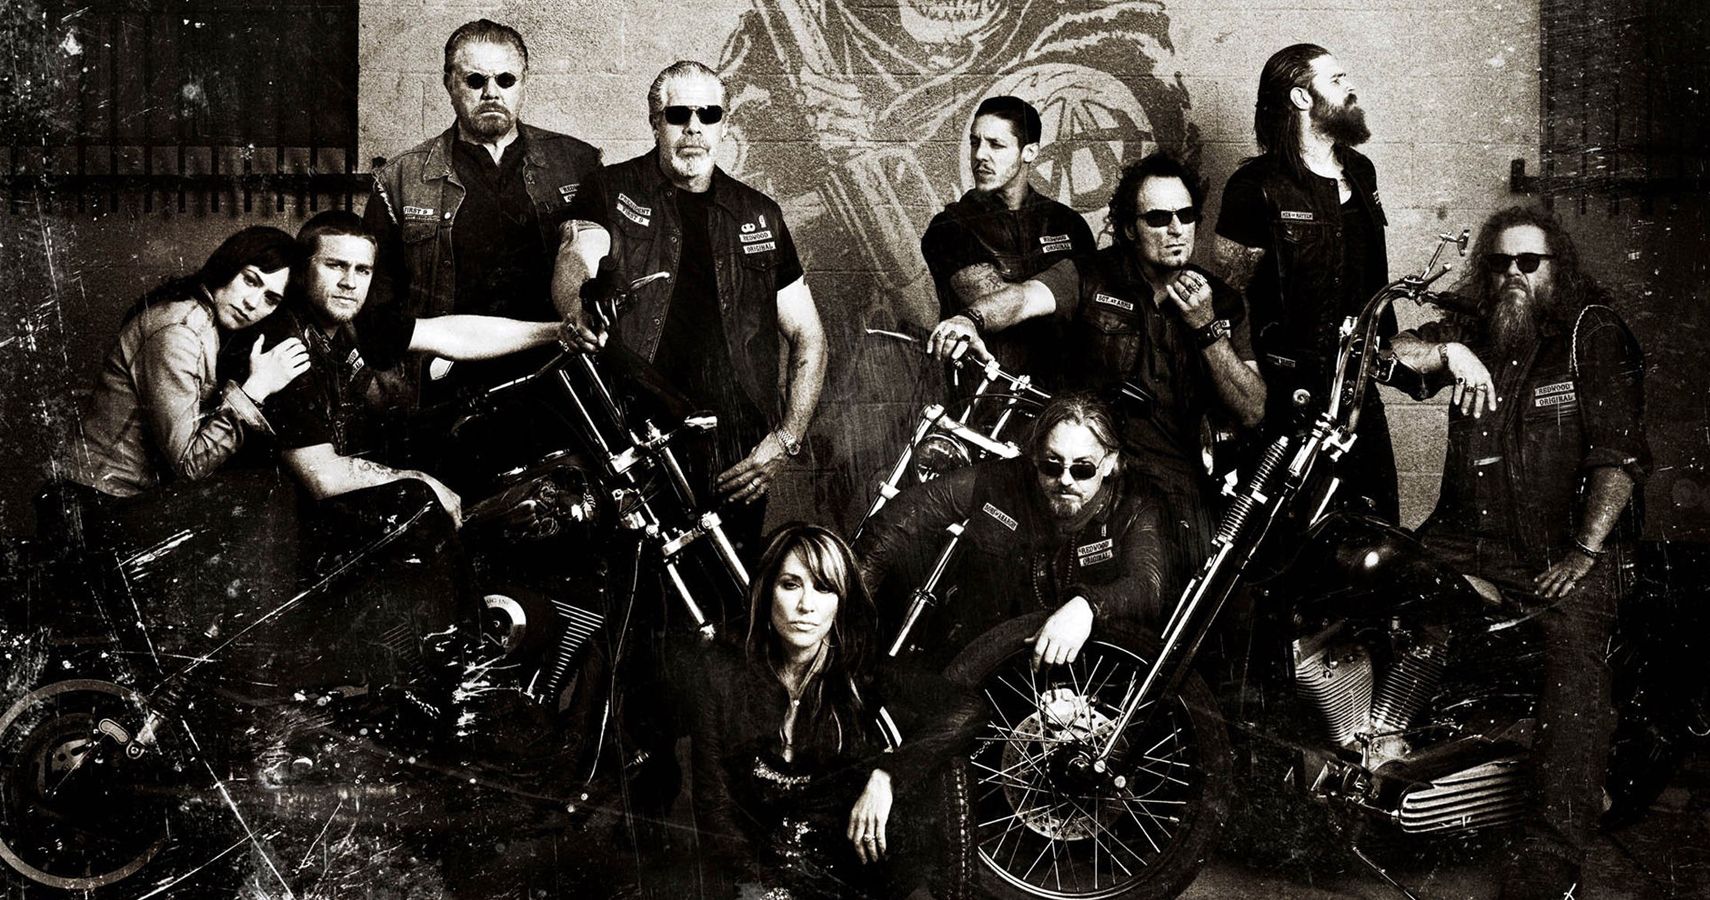 Sons of Anarchy 10 Couples That Would Have Made A Lot Of Sense (But Never Got Together)